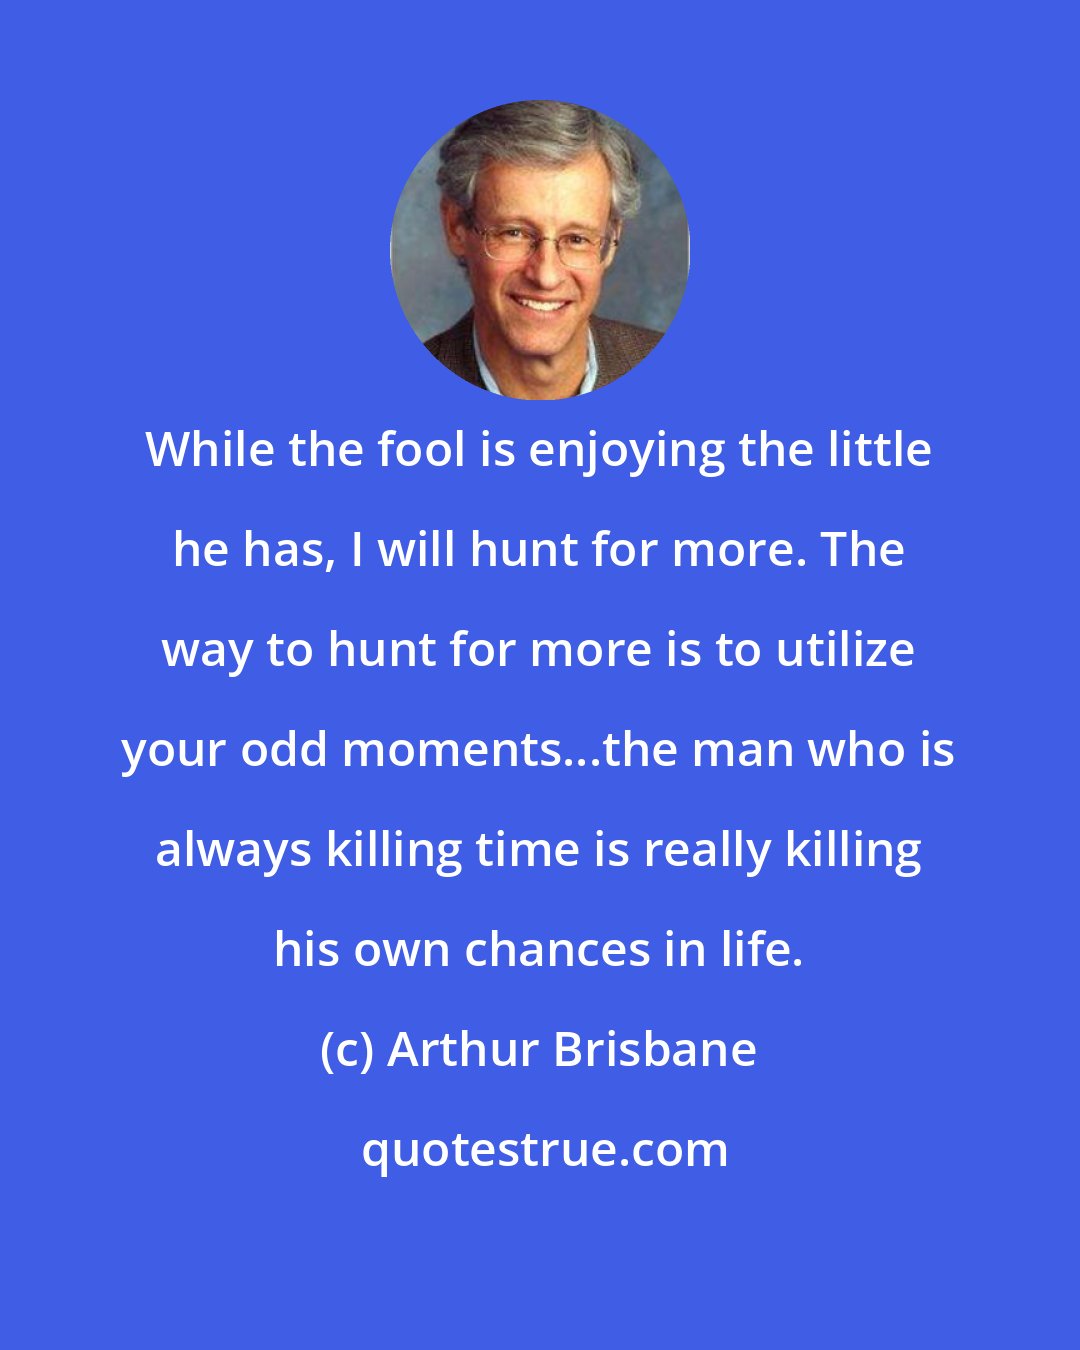 Arthur Brisbane: While the fool is enjoying the little he has, I will hunt for more. The way to hunt for more is to utilize your odd moments...the man who is always killing time is really killing his own chances in life.